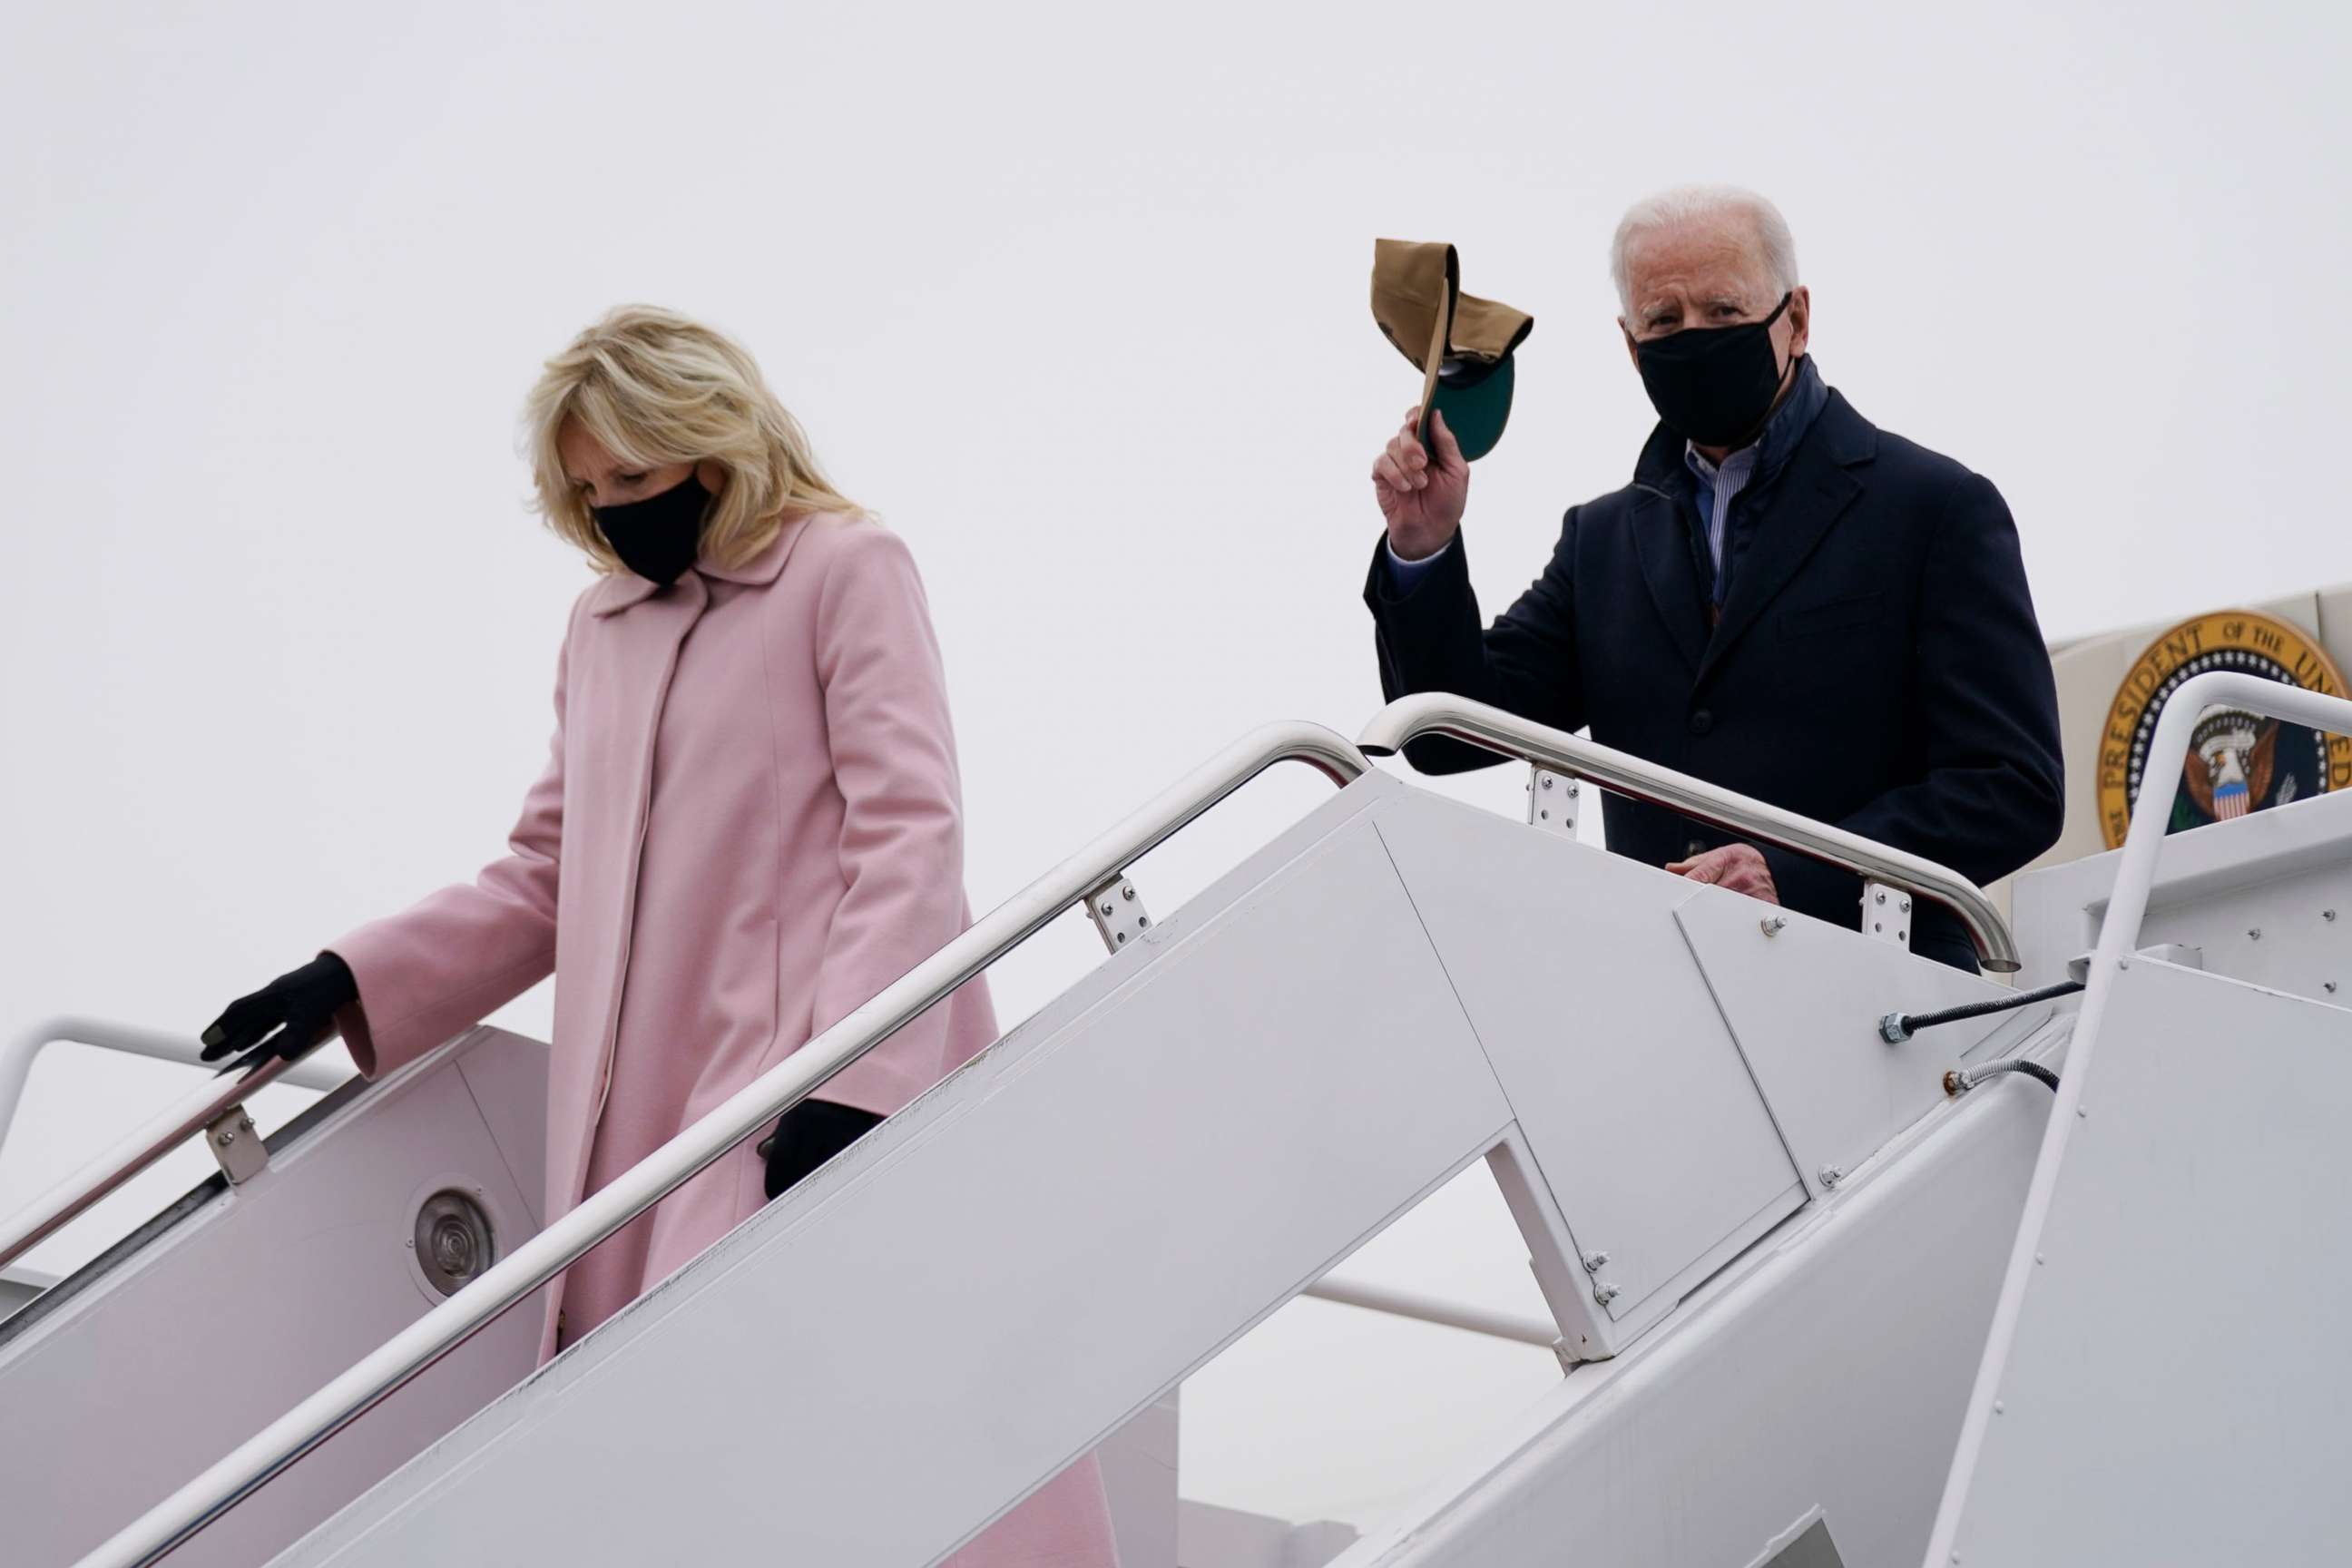 PHOTO: President Joe Biden and first lady Jill Biden arrive at Andrews Air Force Base after spending the weekend at Camp David, Feb. 15, 2021, in Andrews Air Force Base, Md.